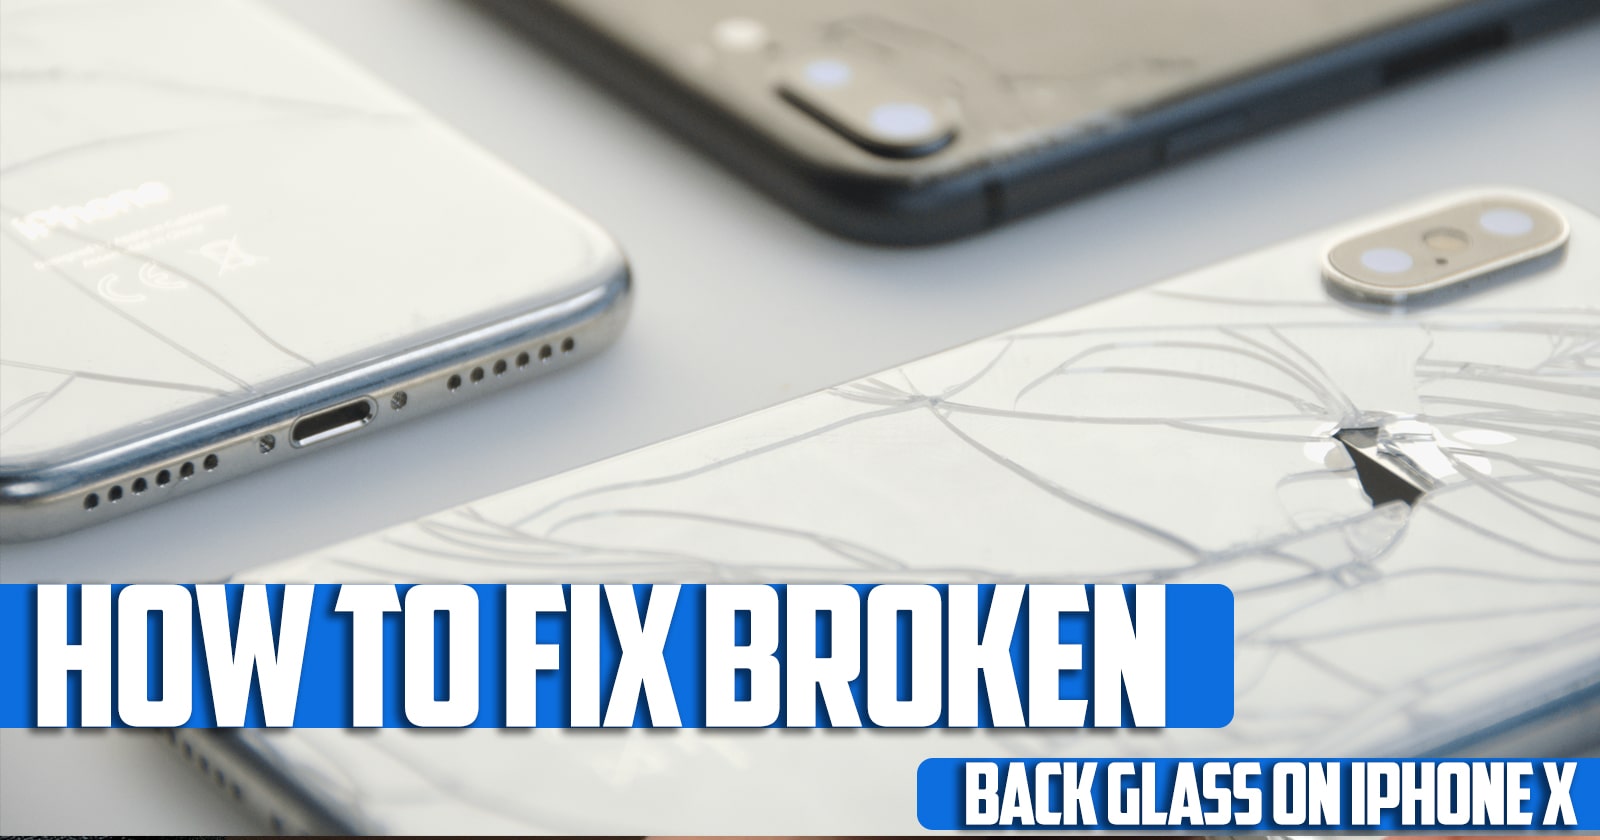 How to Fix Broken Back Glass on iPhone X